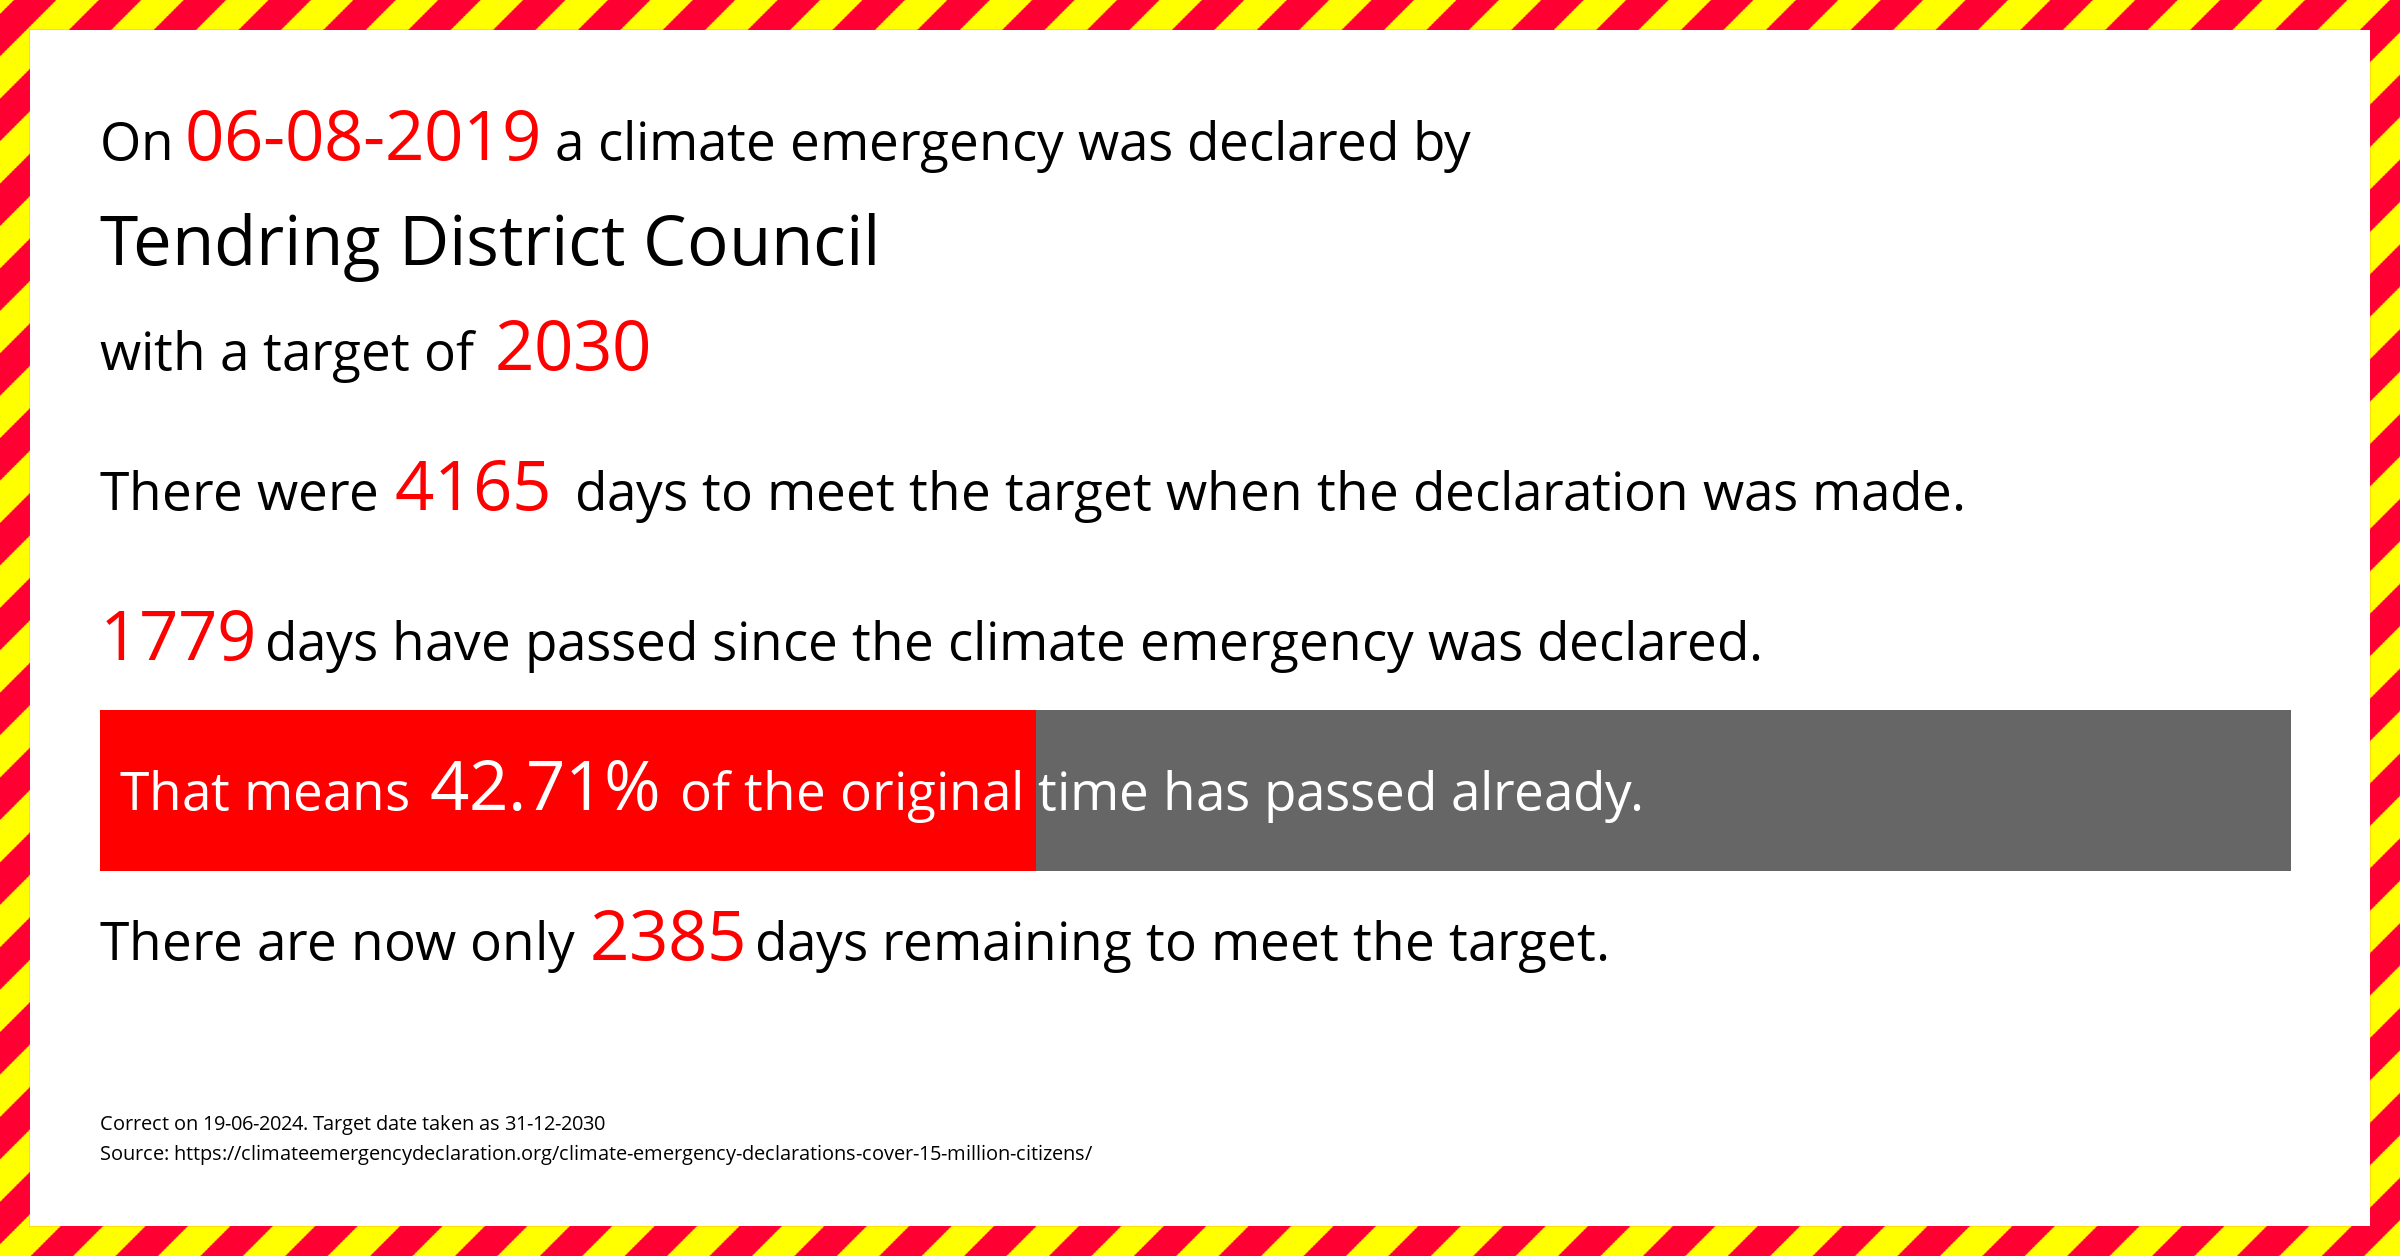 tendring-district-council-climate-emergency